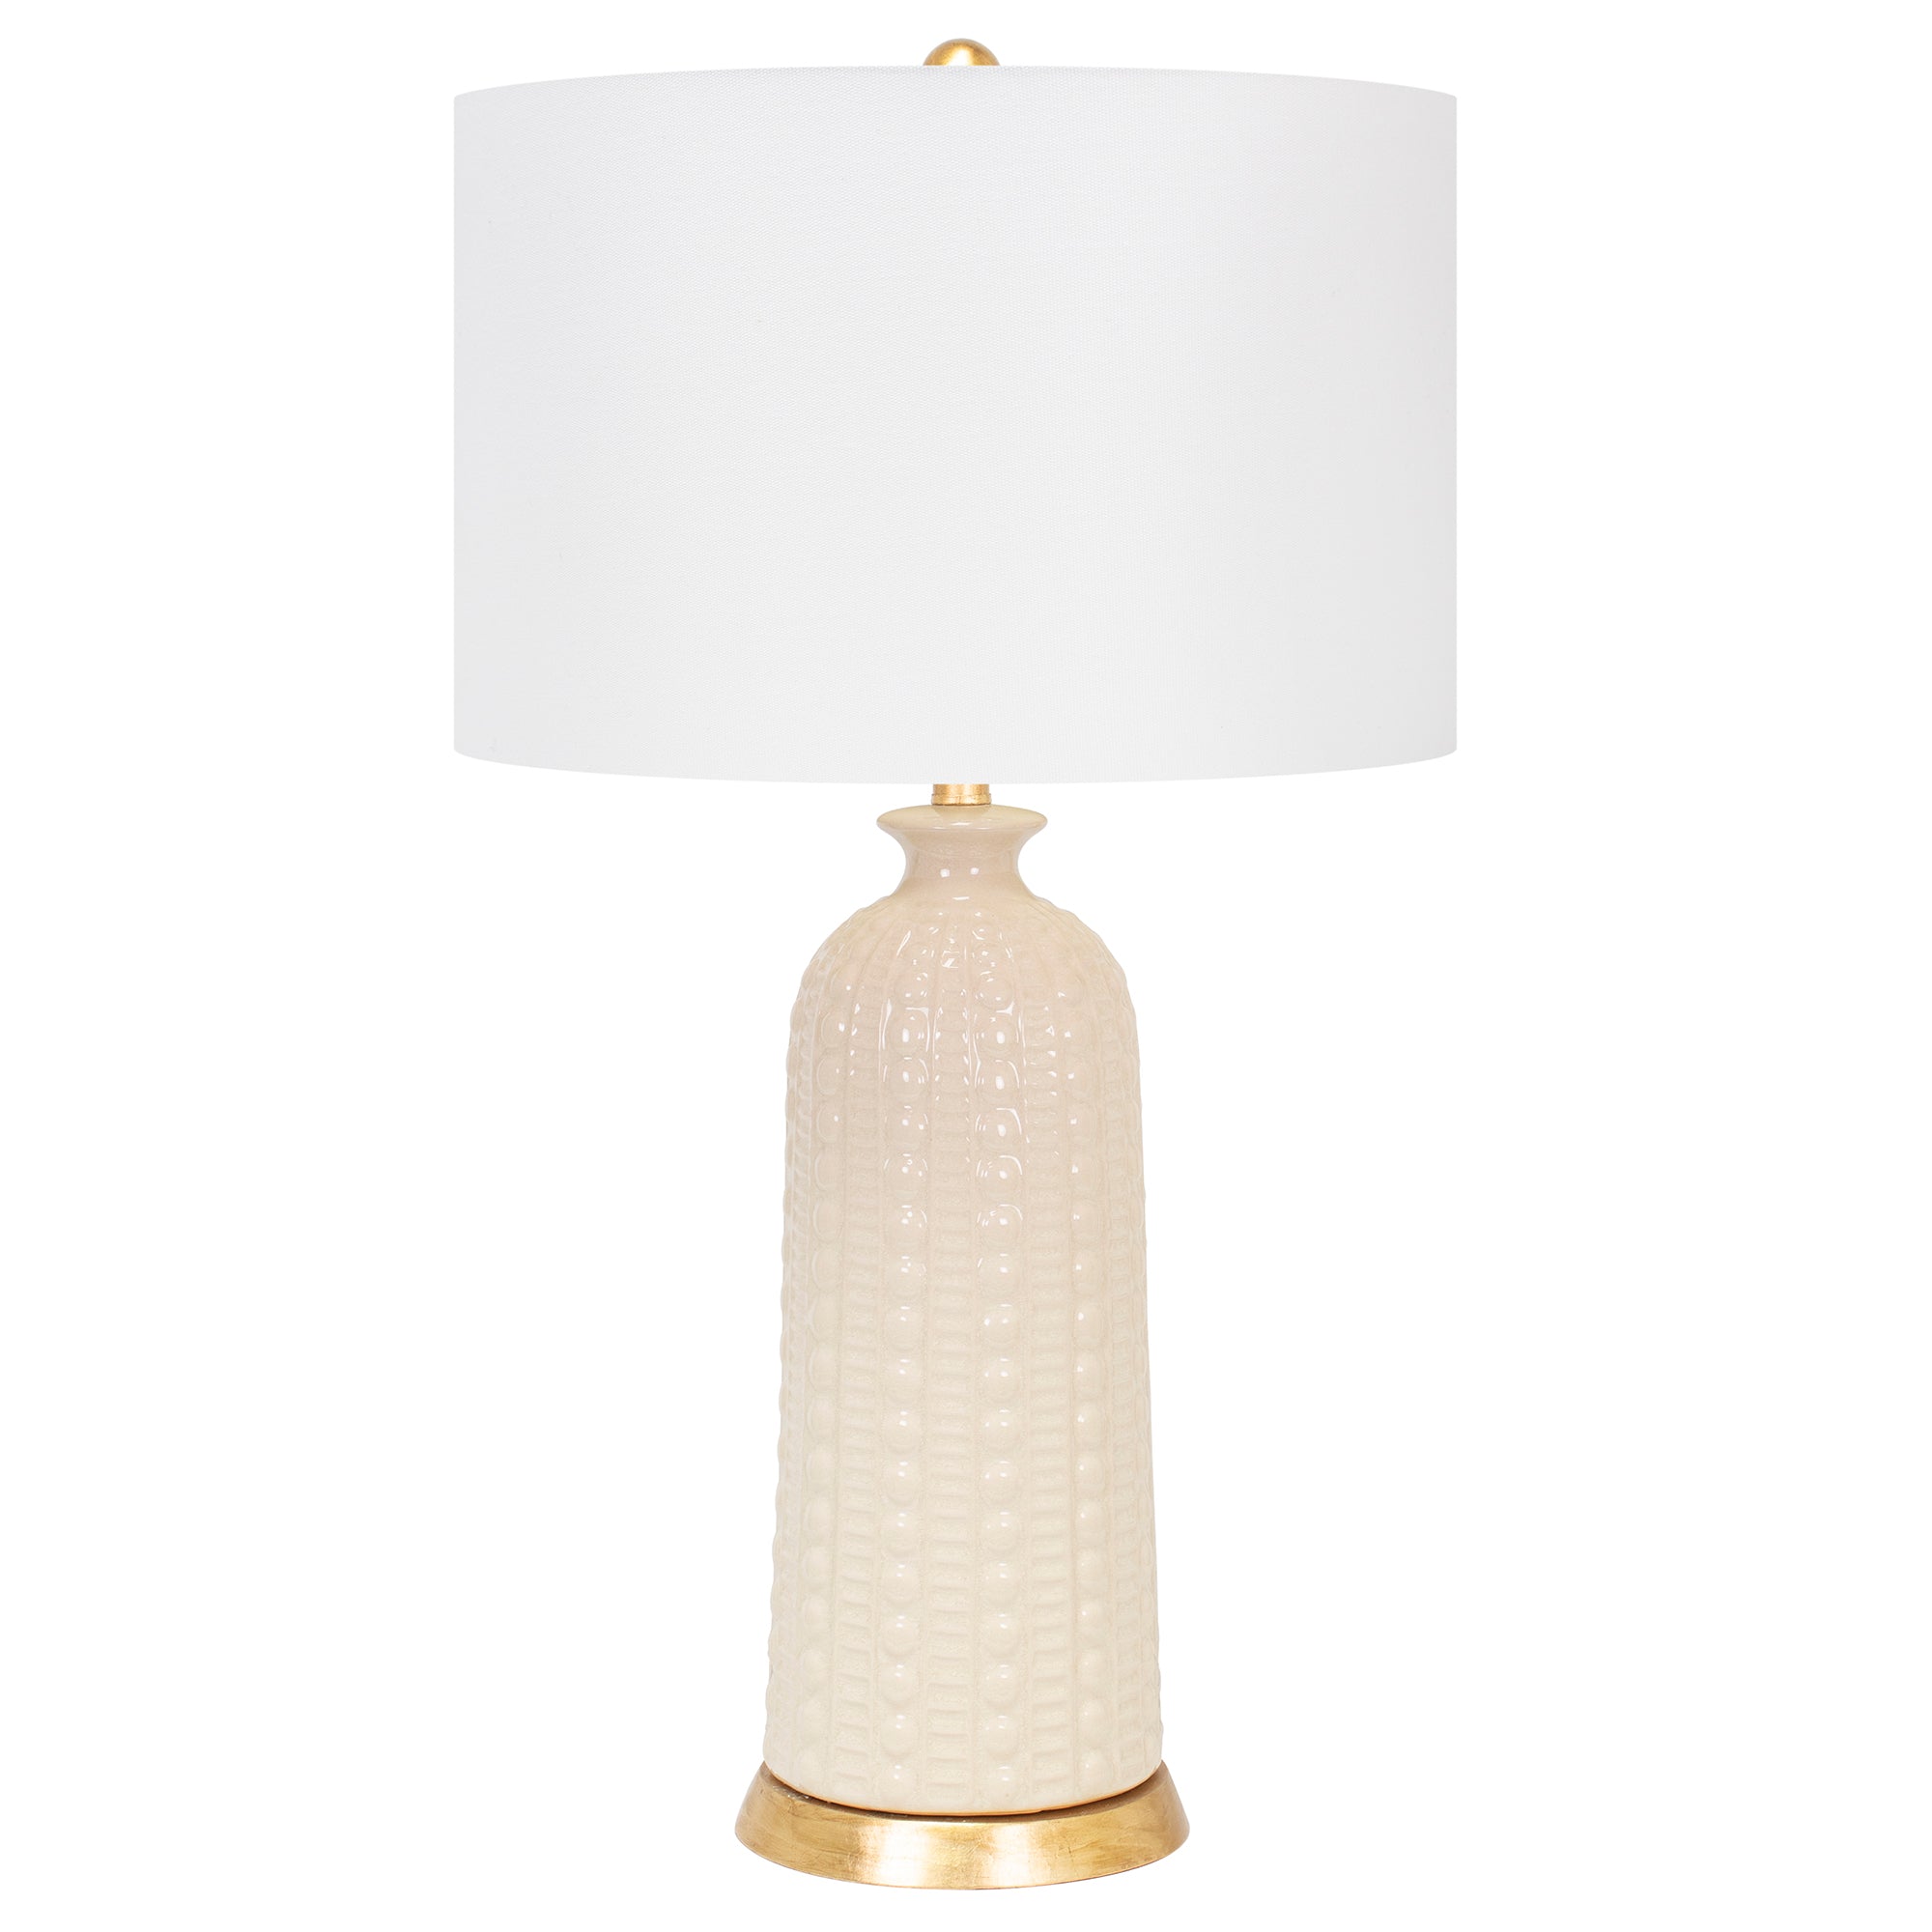 Off-White Melrose Table Lamp-with 17x17x11 White Classic Linen Shade - Couture Lamps